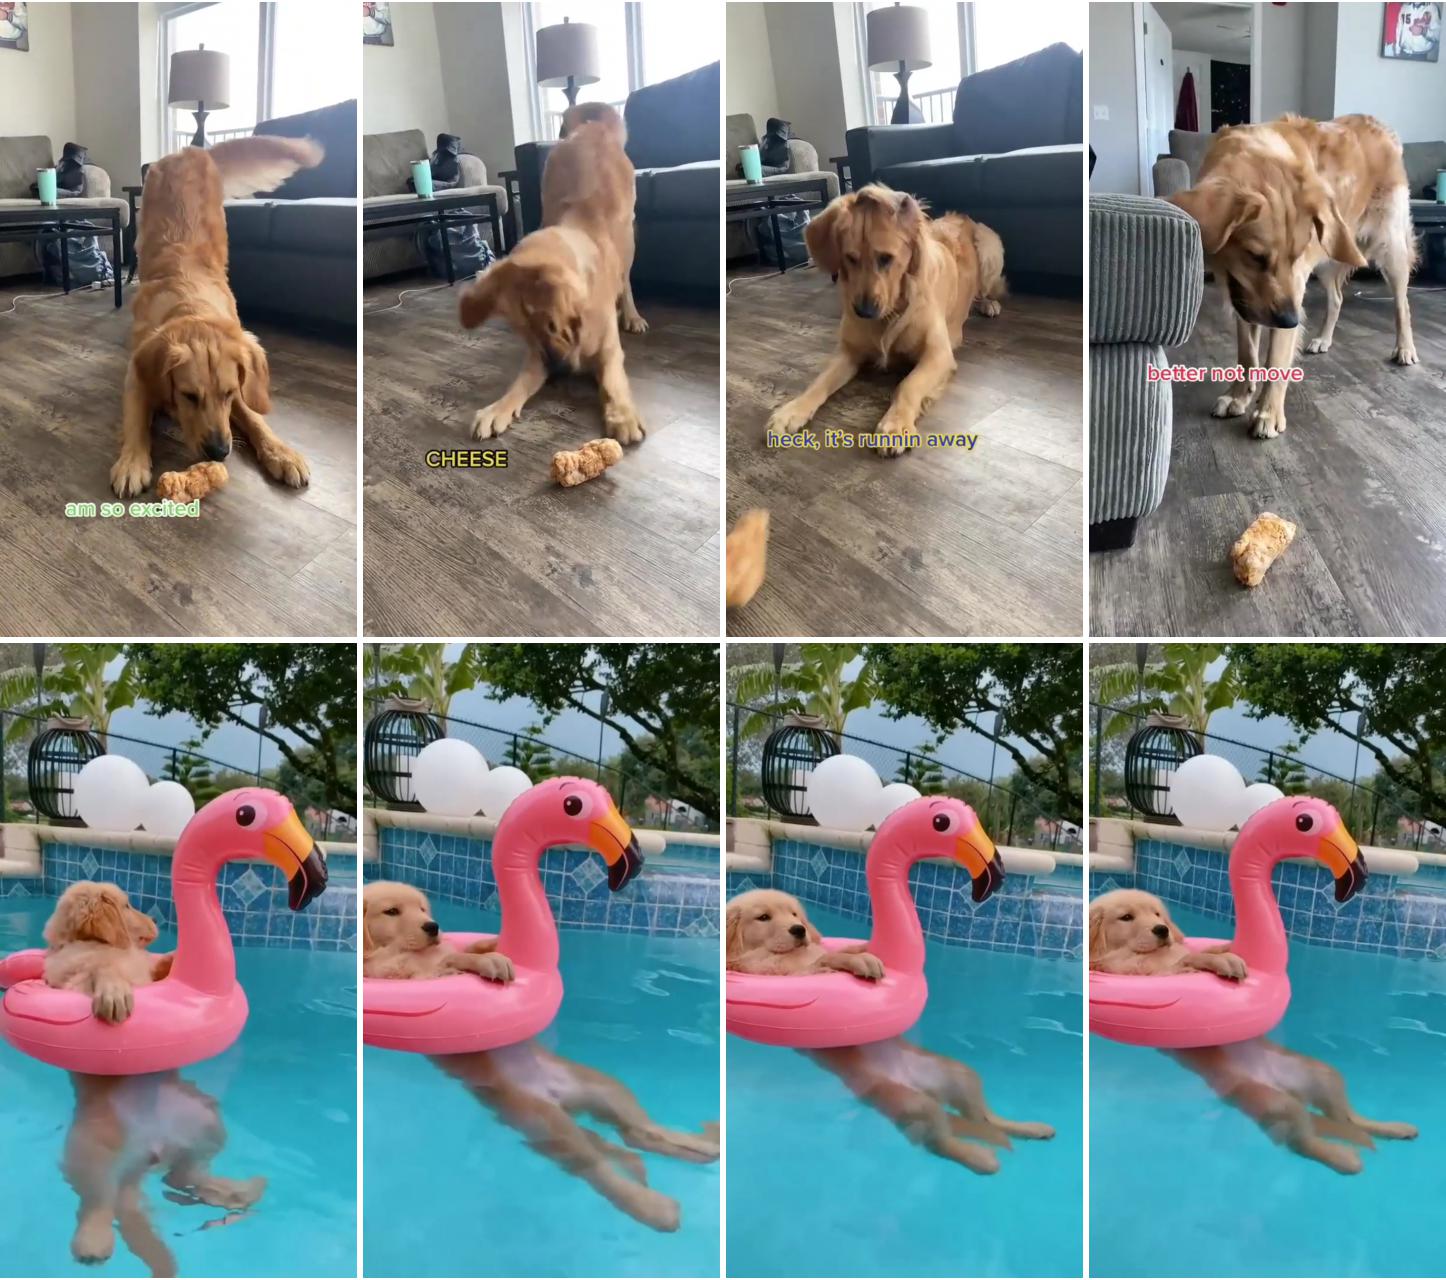 Felt bad for the lemon and pickle so we gave him his puffed yak chew; golden retriever puppy chilling in the pool, cute puppy video